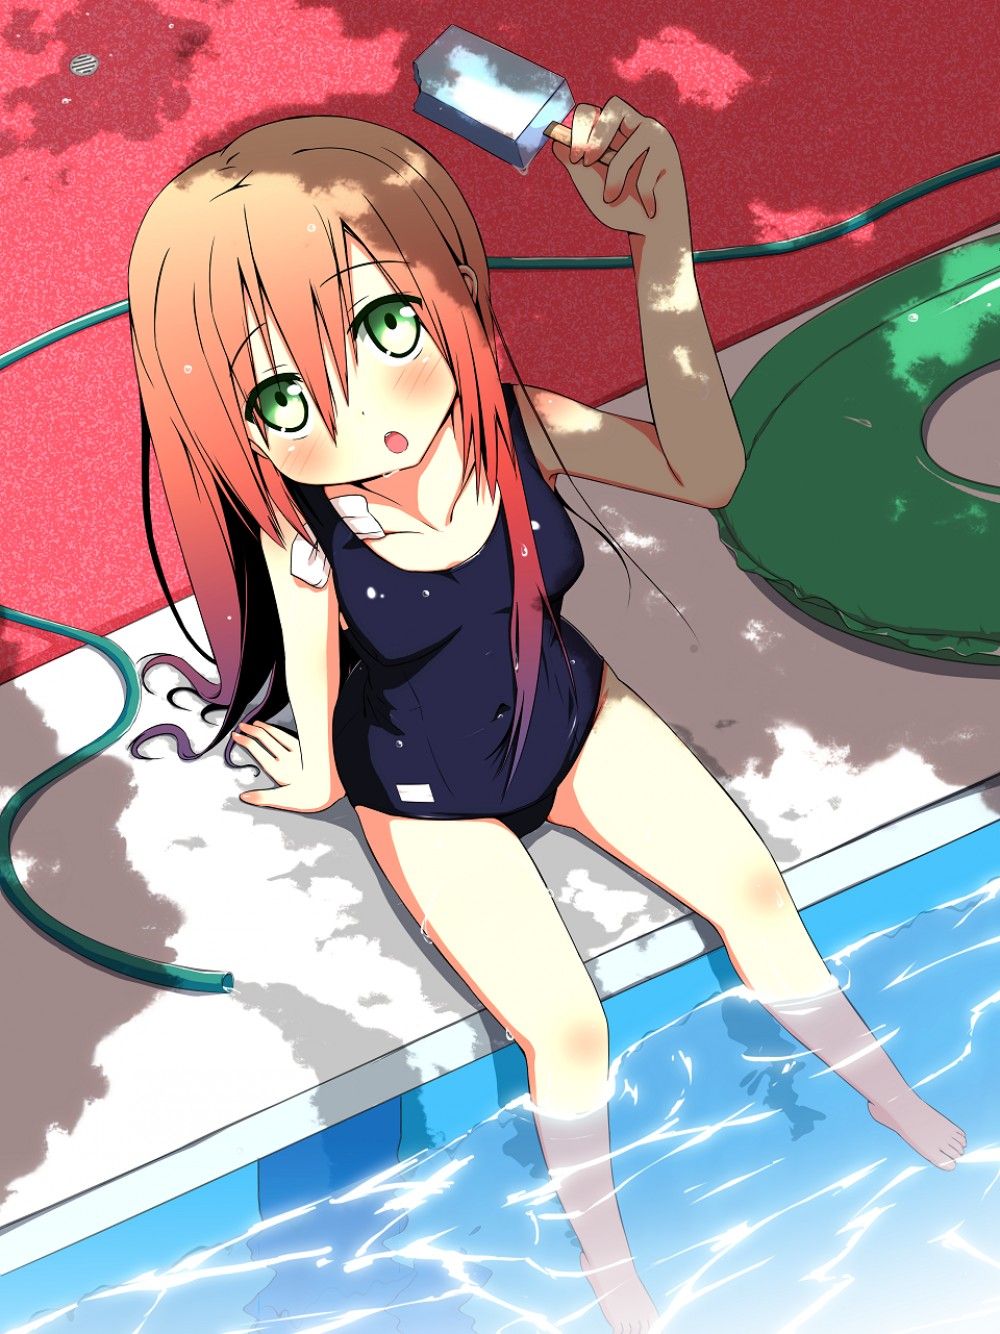 [Secondary] Moe images of swimsuit girls bathing in the sea and swimming pool 4